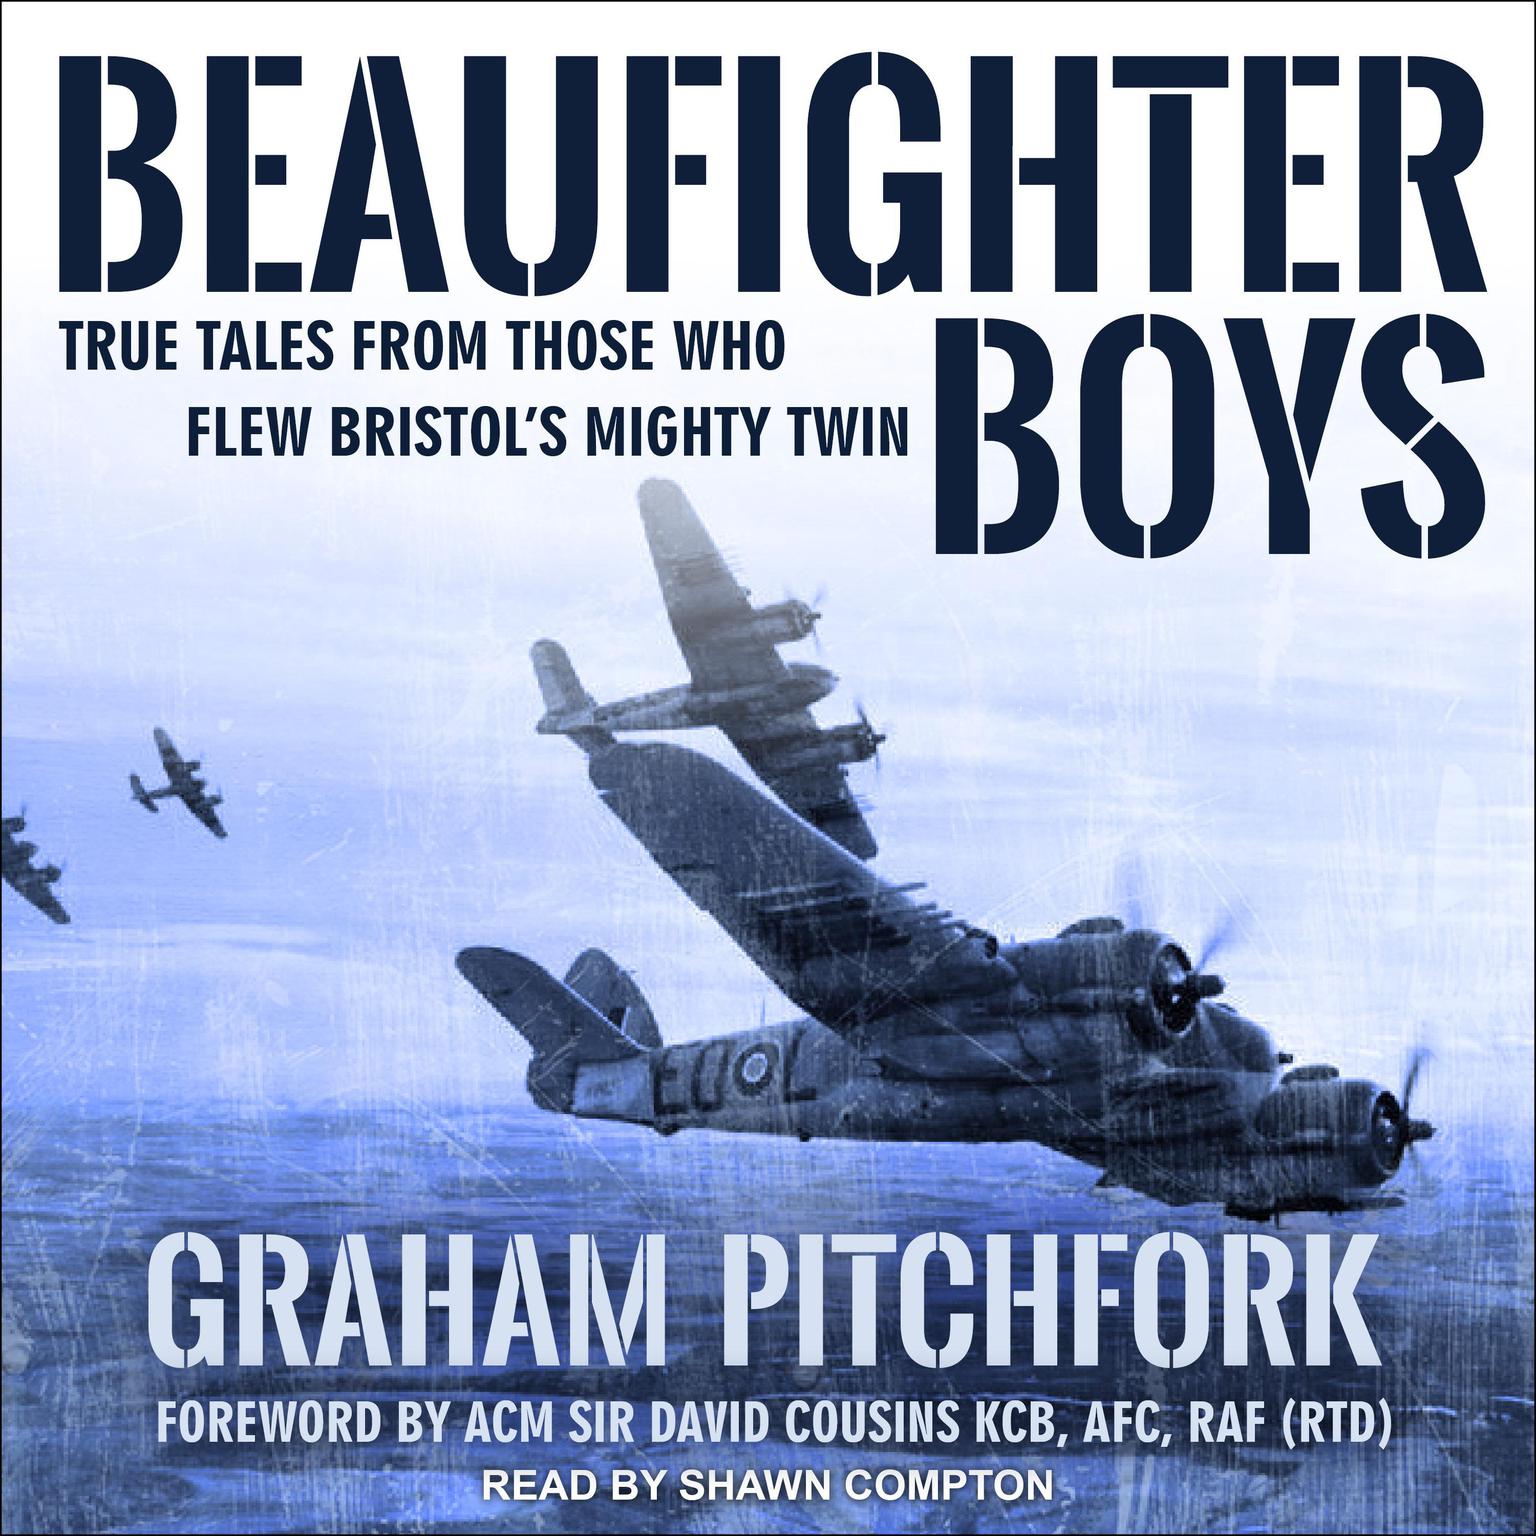 Beaufighter Boys: True Tales From Those Who Flew Bristol’s Mighty Twin Audiobook, by Graham Pitchfork